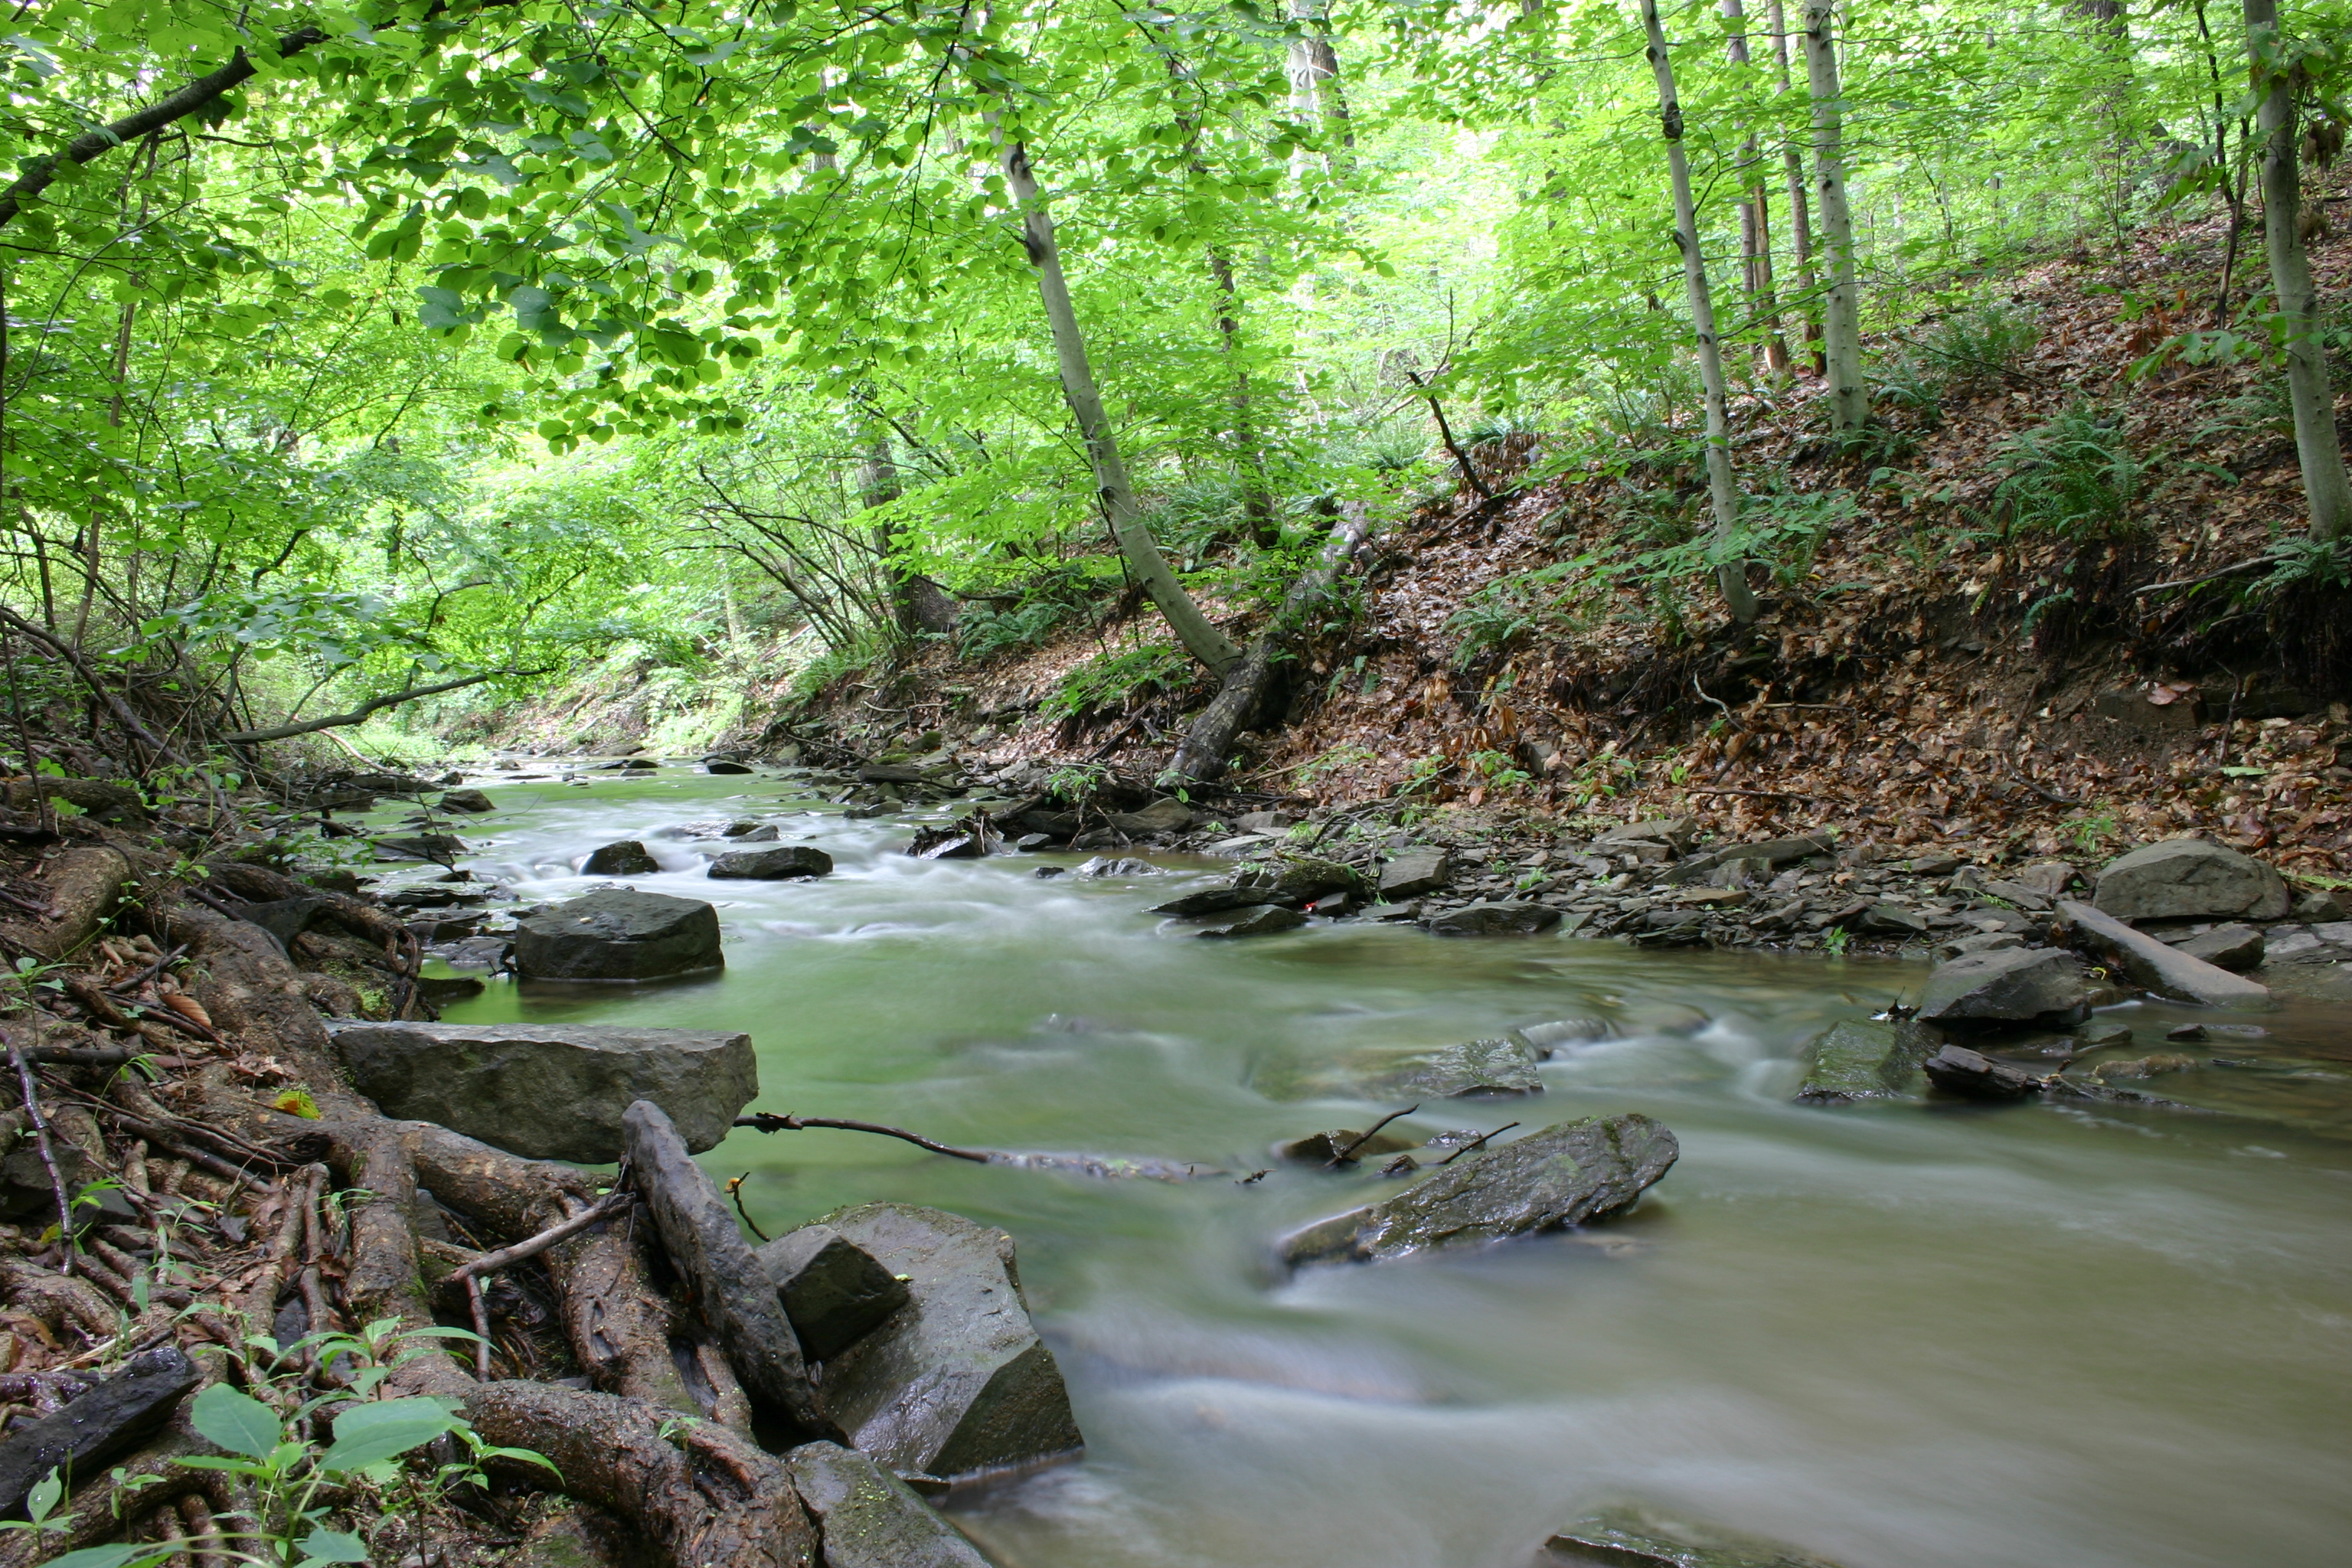 File:Forest-Creek-Eagleville-PA-USA.jpg - Wikimedia Commons